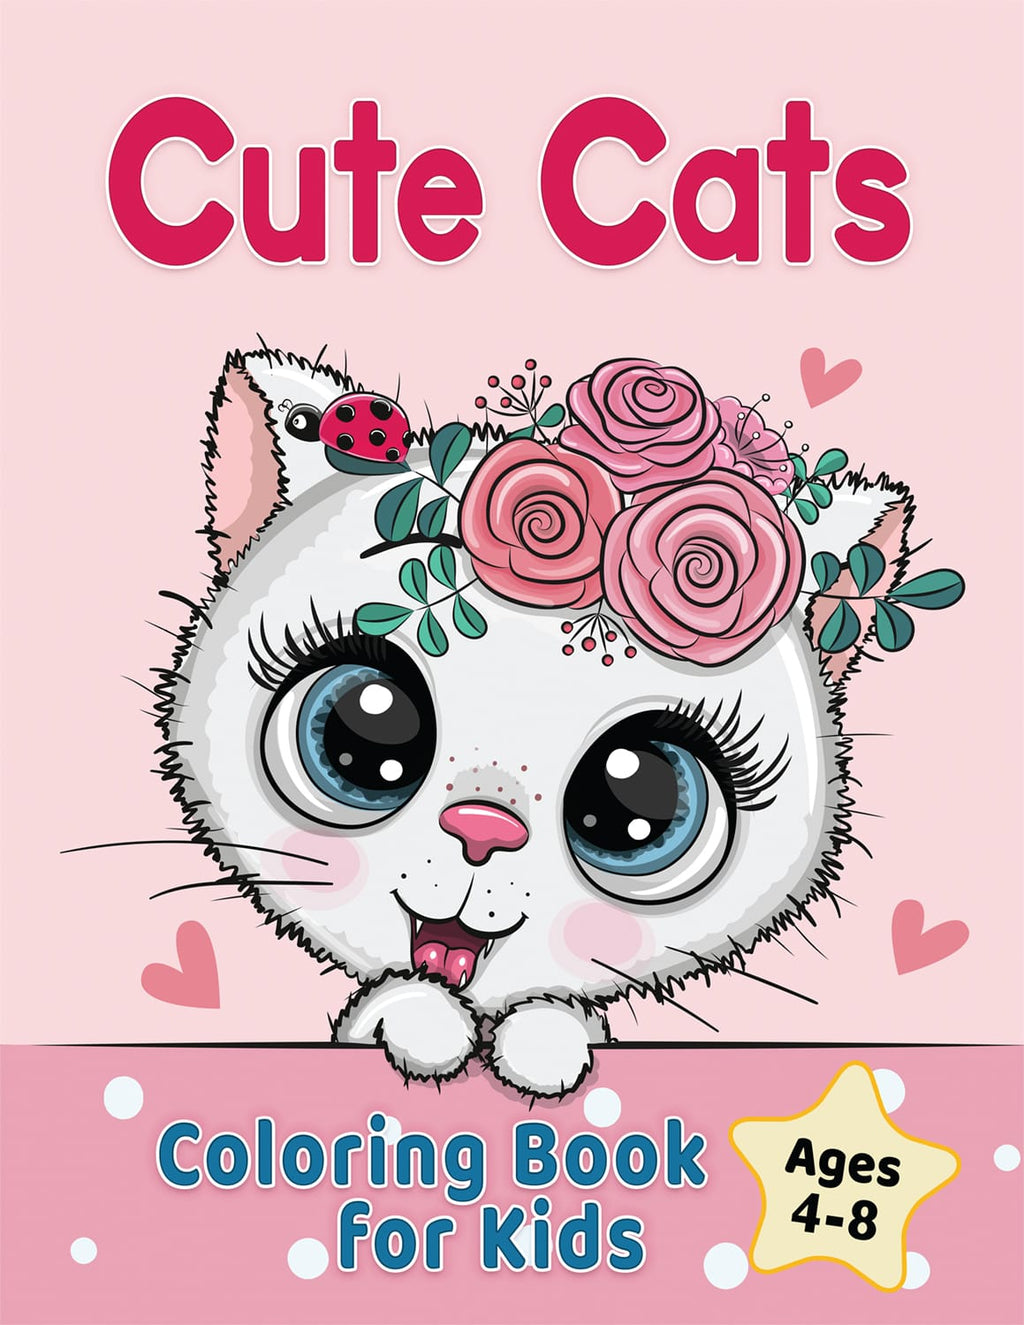 cute cats coloring book for kids ages 4-8